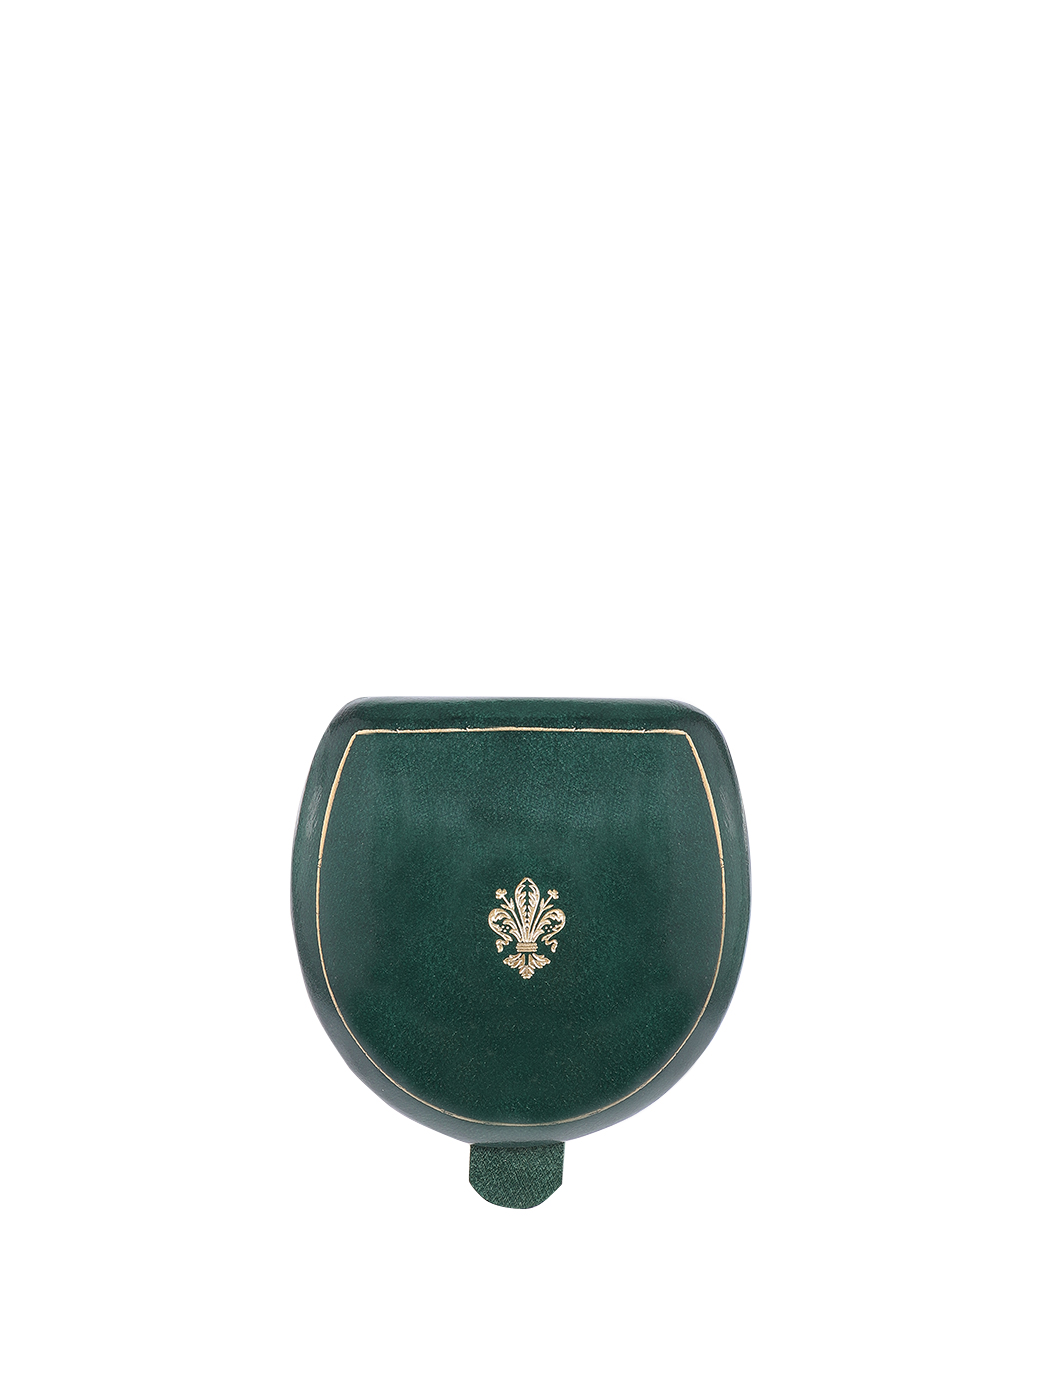 Florentine Lily Tacco Coin Holder Green